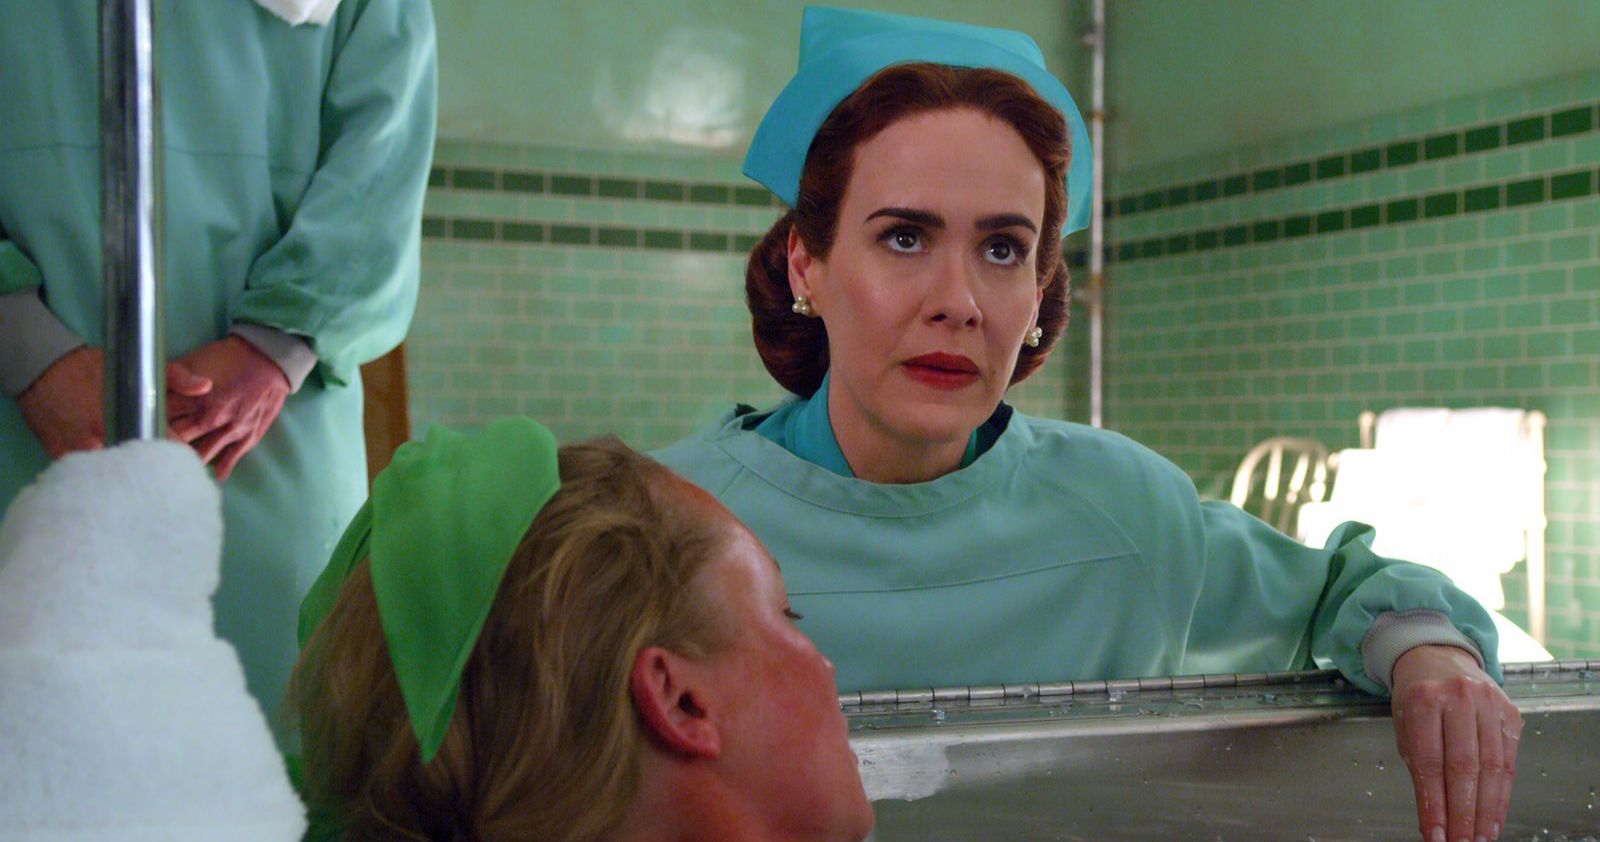 Sarah Paulson Is Ratched in First Look at New Netflix Series from American Horror Story Creator